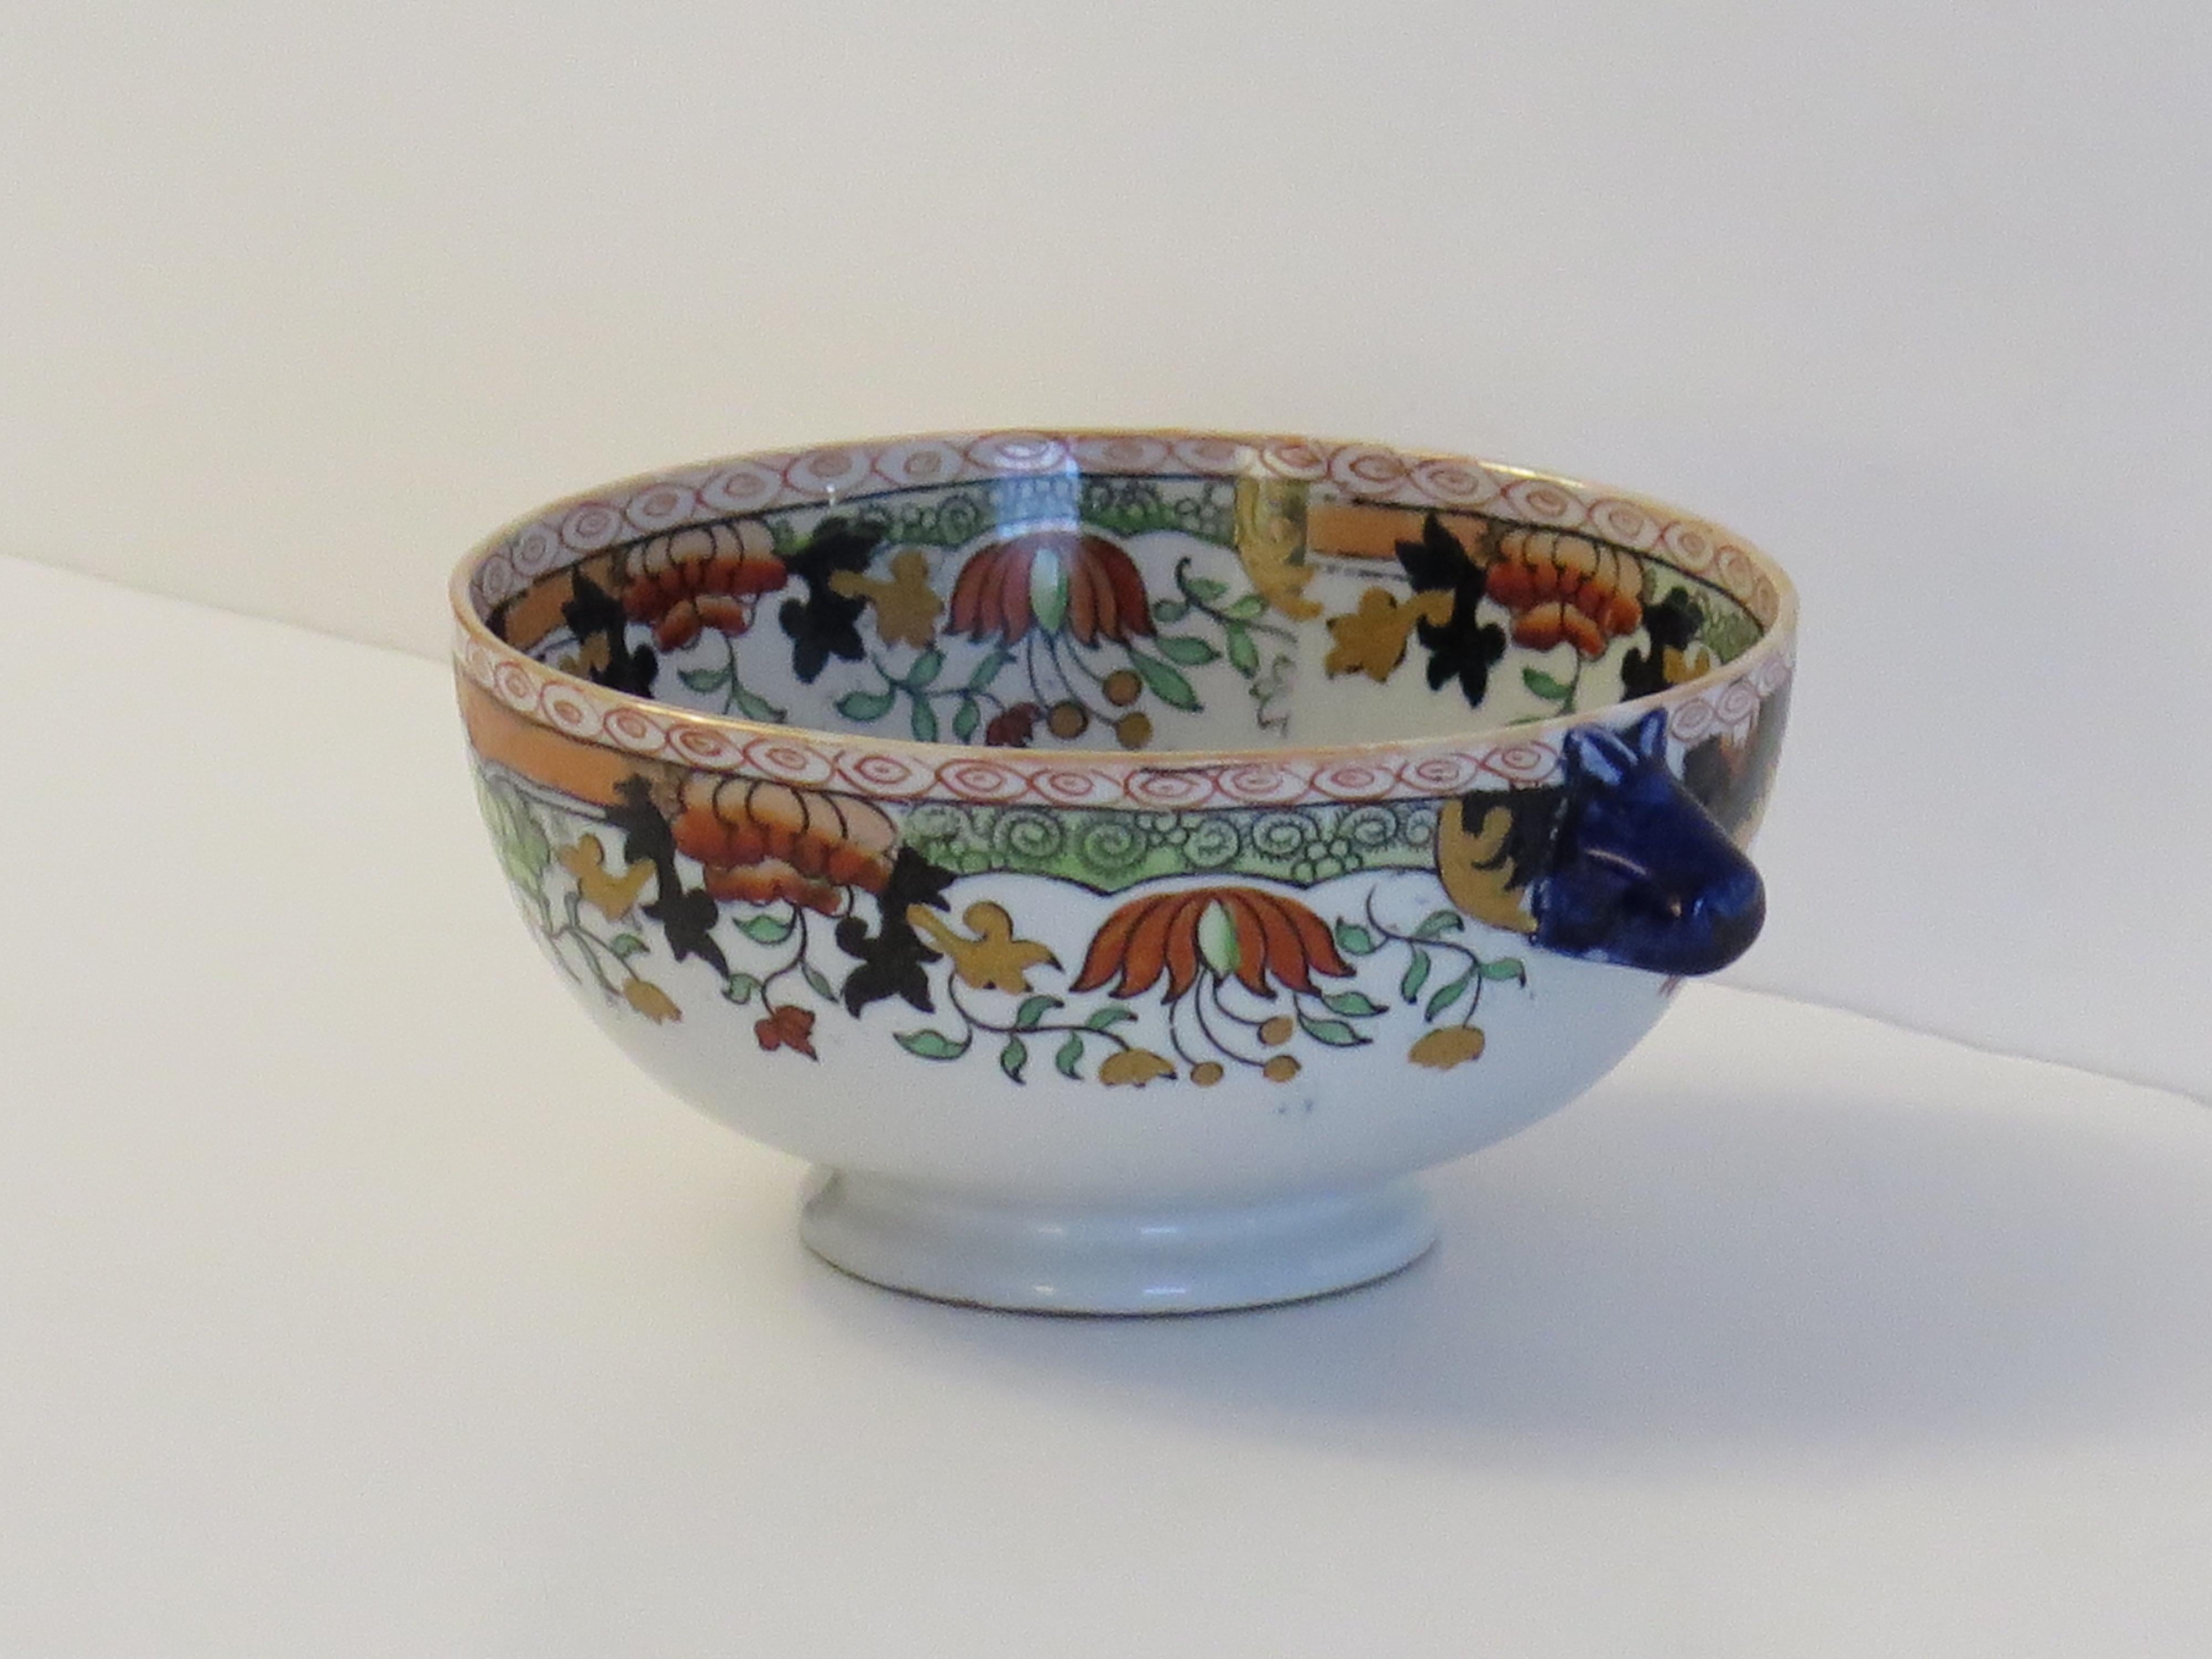 Masons Ironstone Bowl in Peacock Peony & Rock hand painted Pattern, circa 1838 In Good Condition For Sale In Lincoln, Lincolnshire